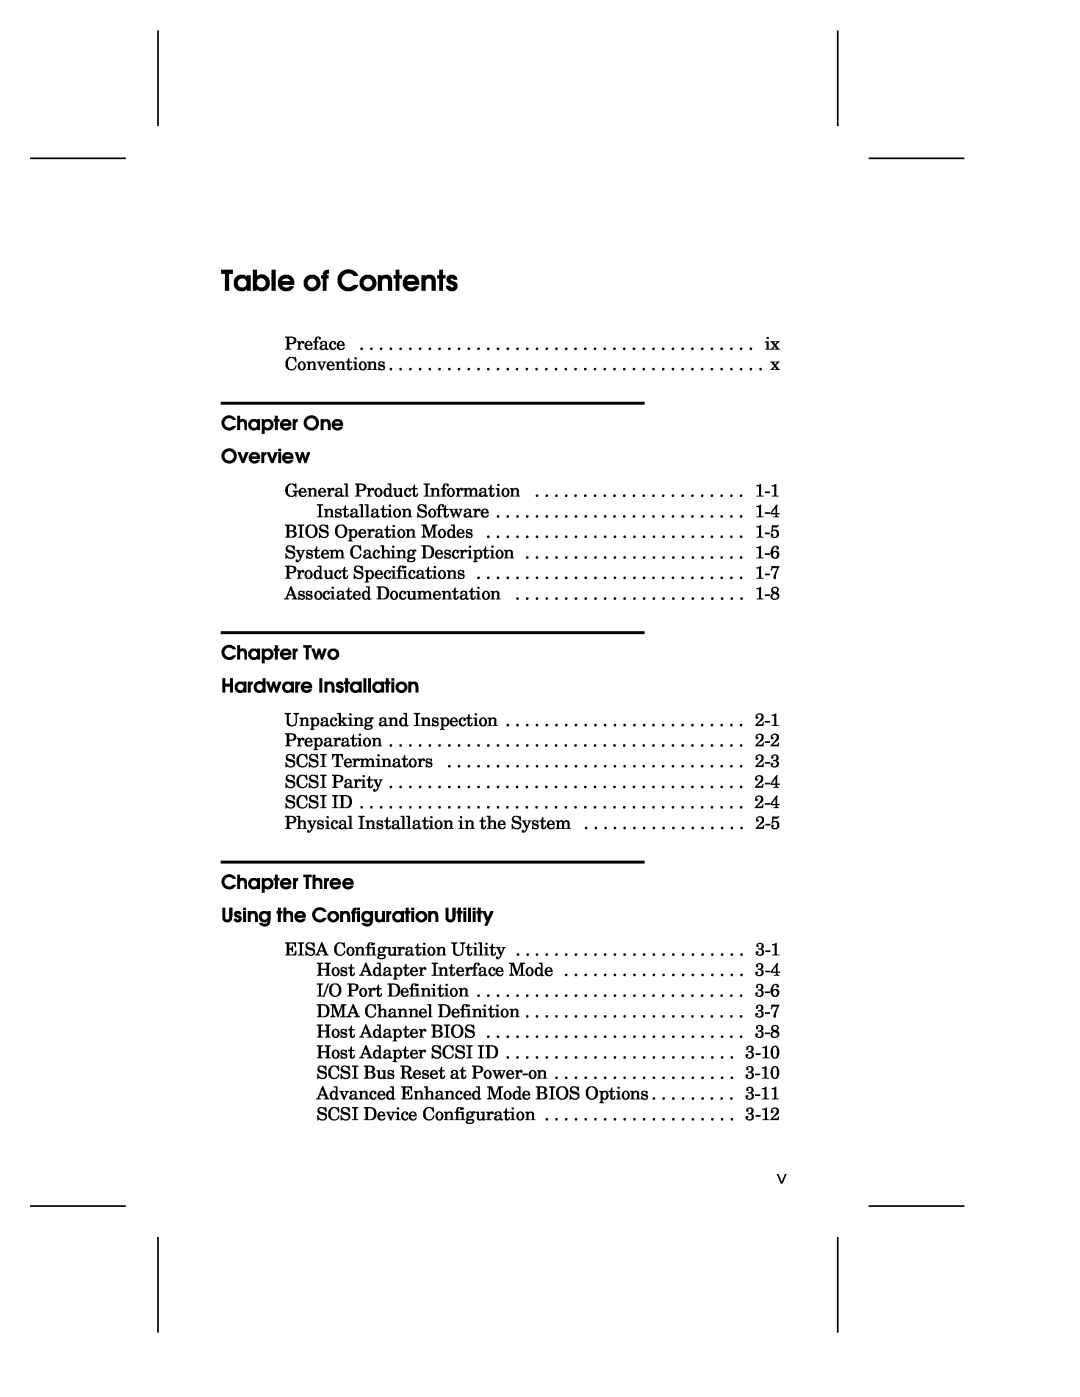 Adaptec 1742A, AHA-1740A, 1744 user manual Table of Contents, Chapter One Overview, Chapter Two Hardware Installation 